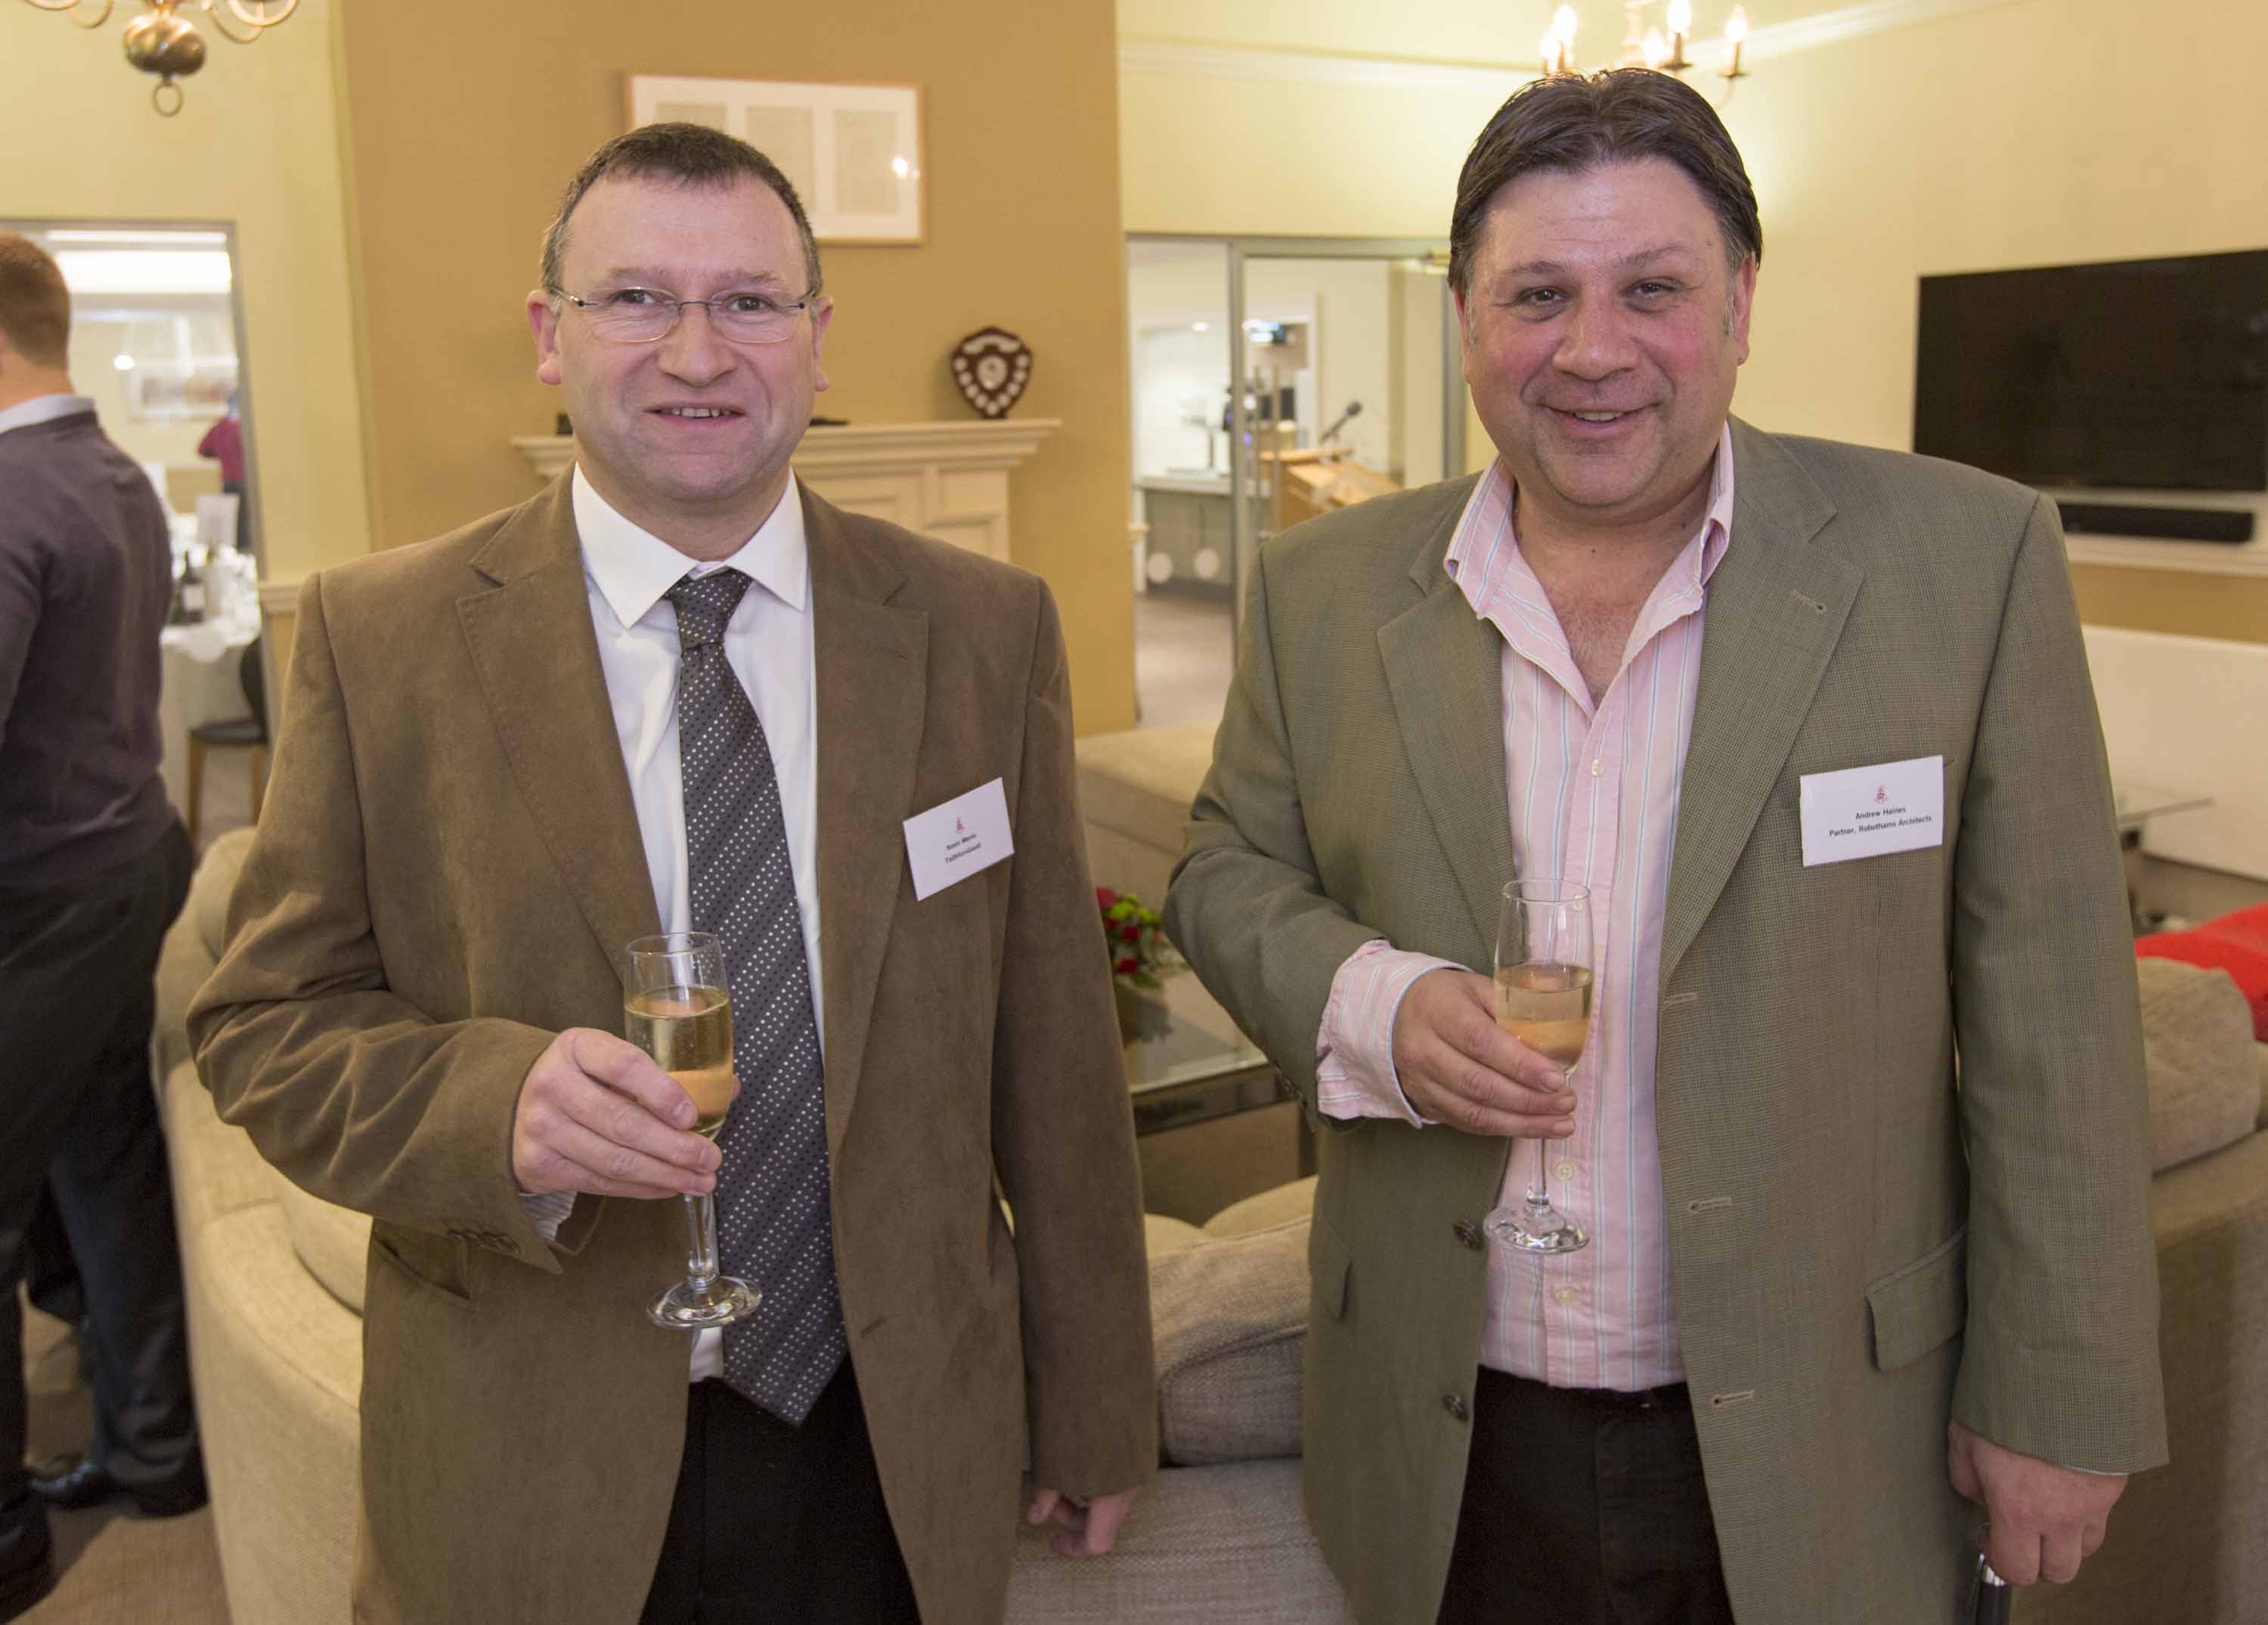 Kevin Merris (Faithful+Gould) and Andrew Haines (Robotham Architects) - Housman Hall Official Re-Opening, 29th November 2014